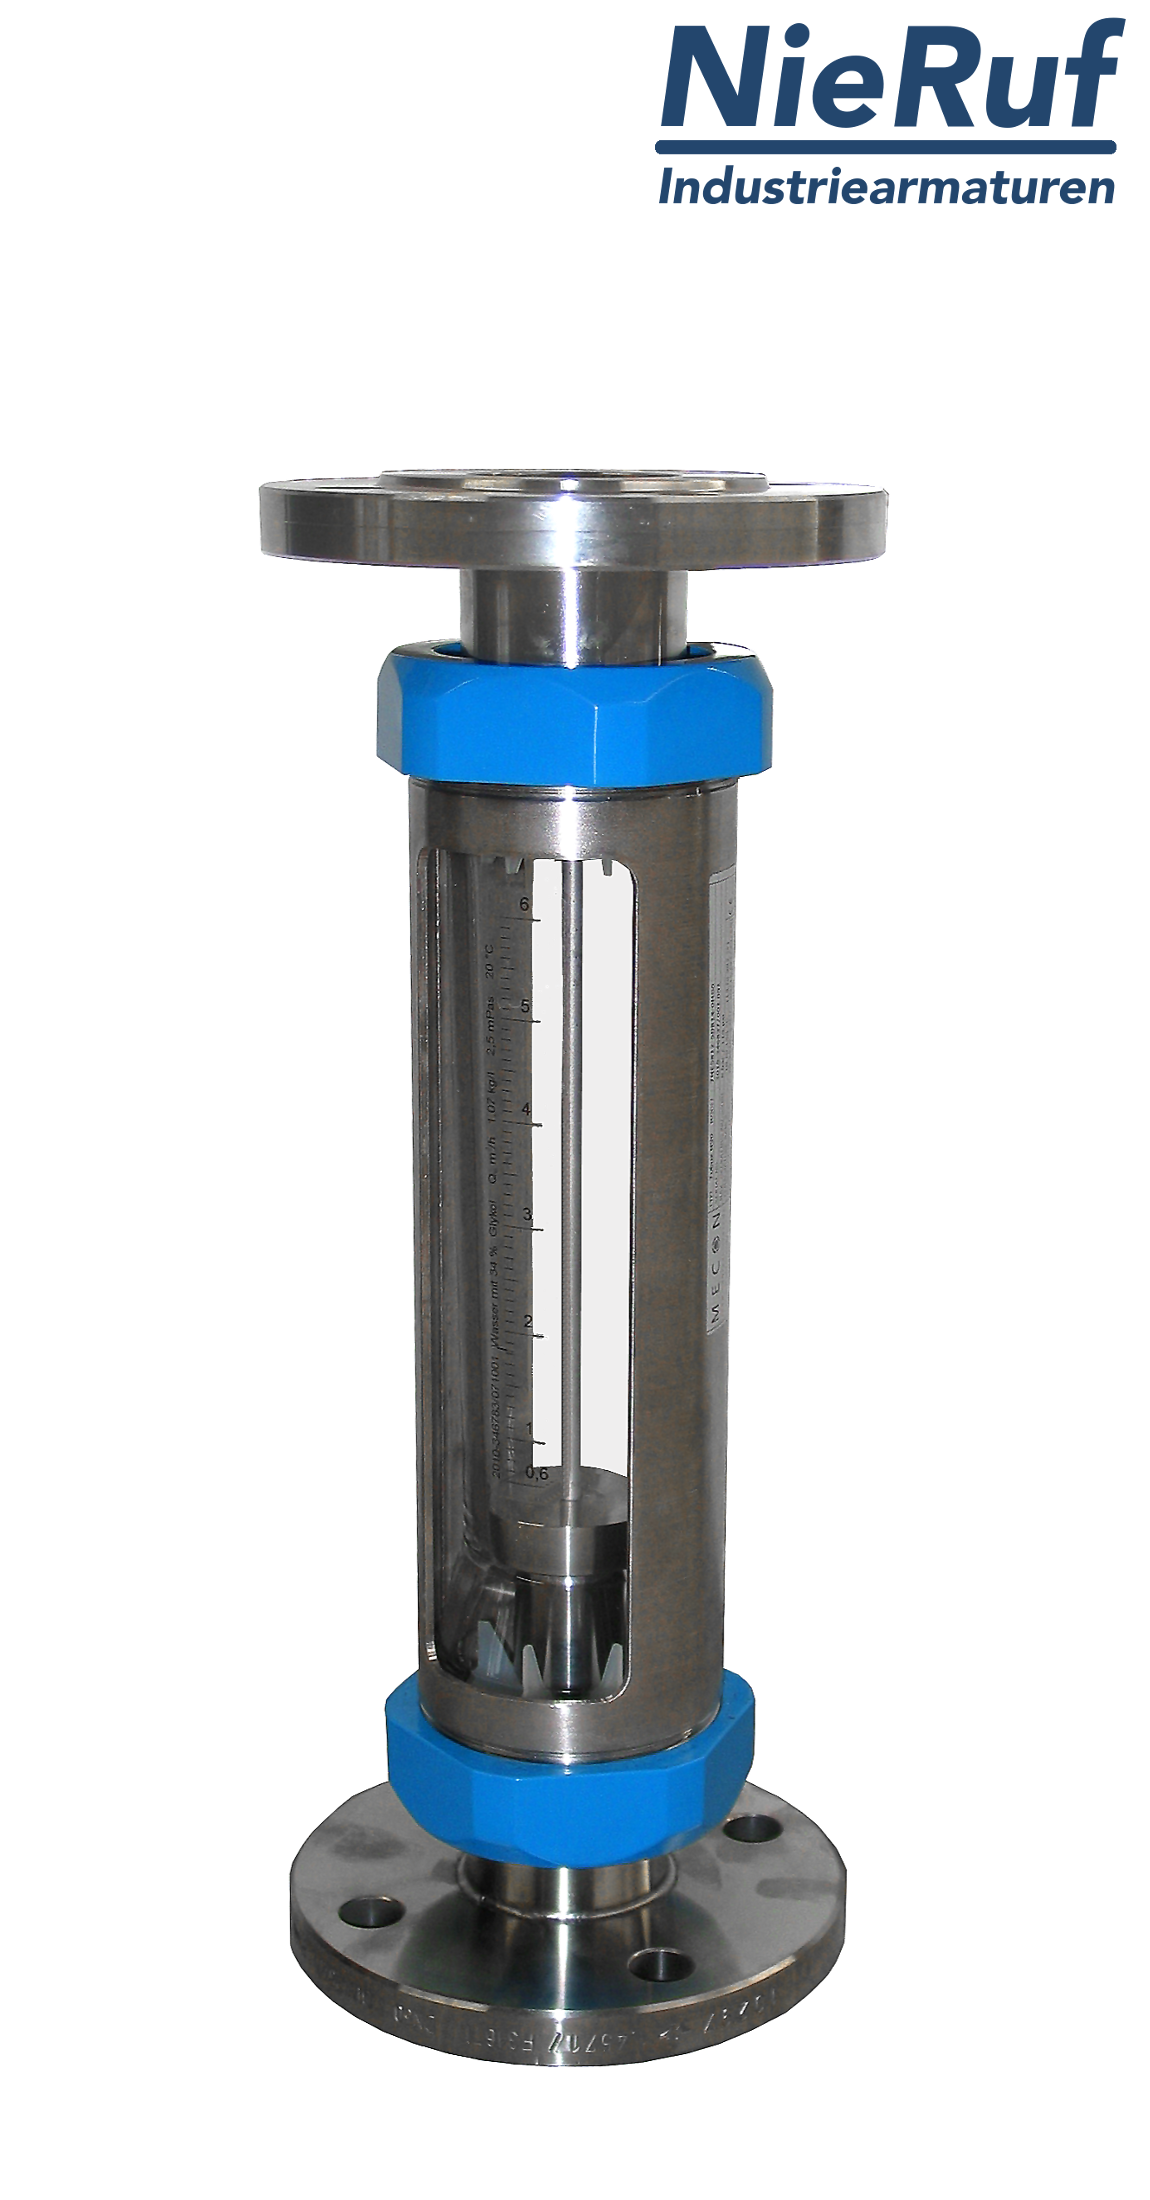 Variable area flowmeter stainless steel + borosilicate flange DN50 650.0 - 6500 l/h water FKM